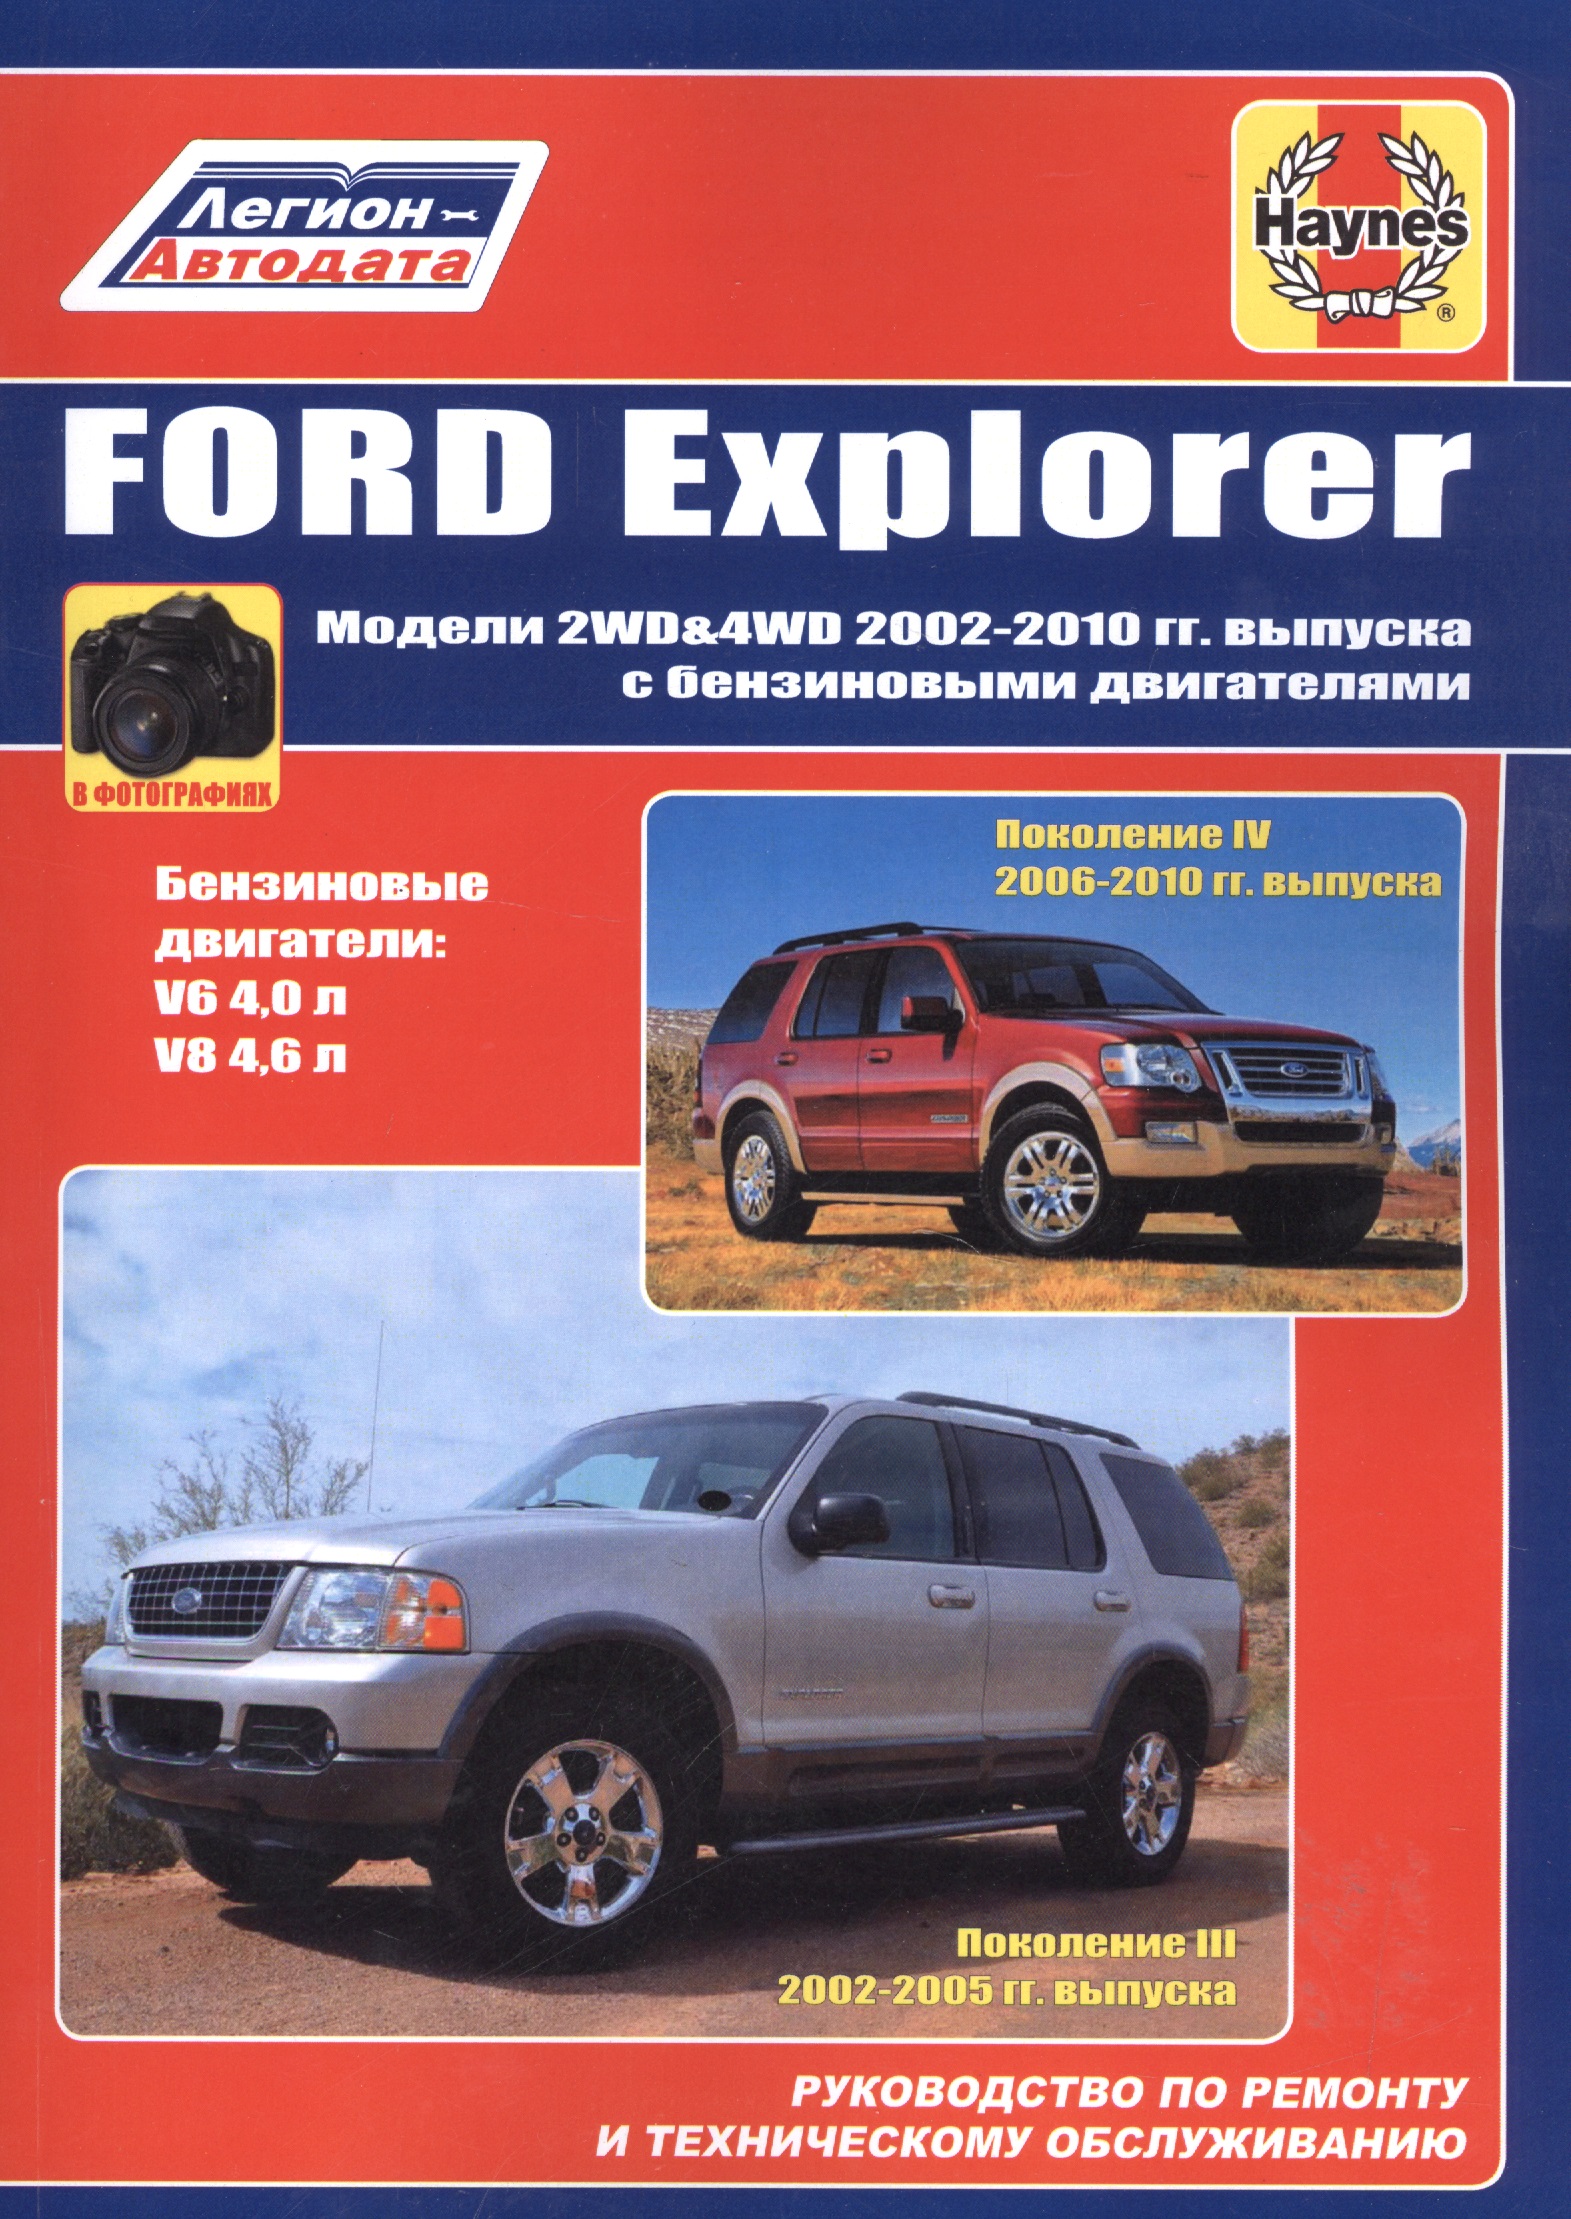 Ford Explorer   2WD 2002 - 2010      ()